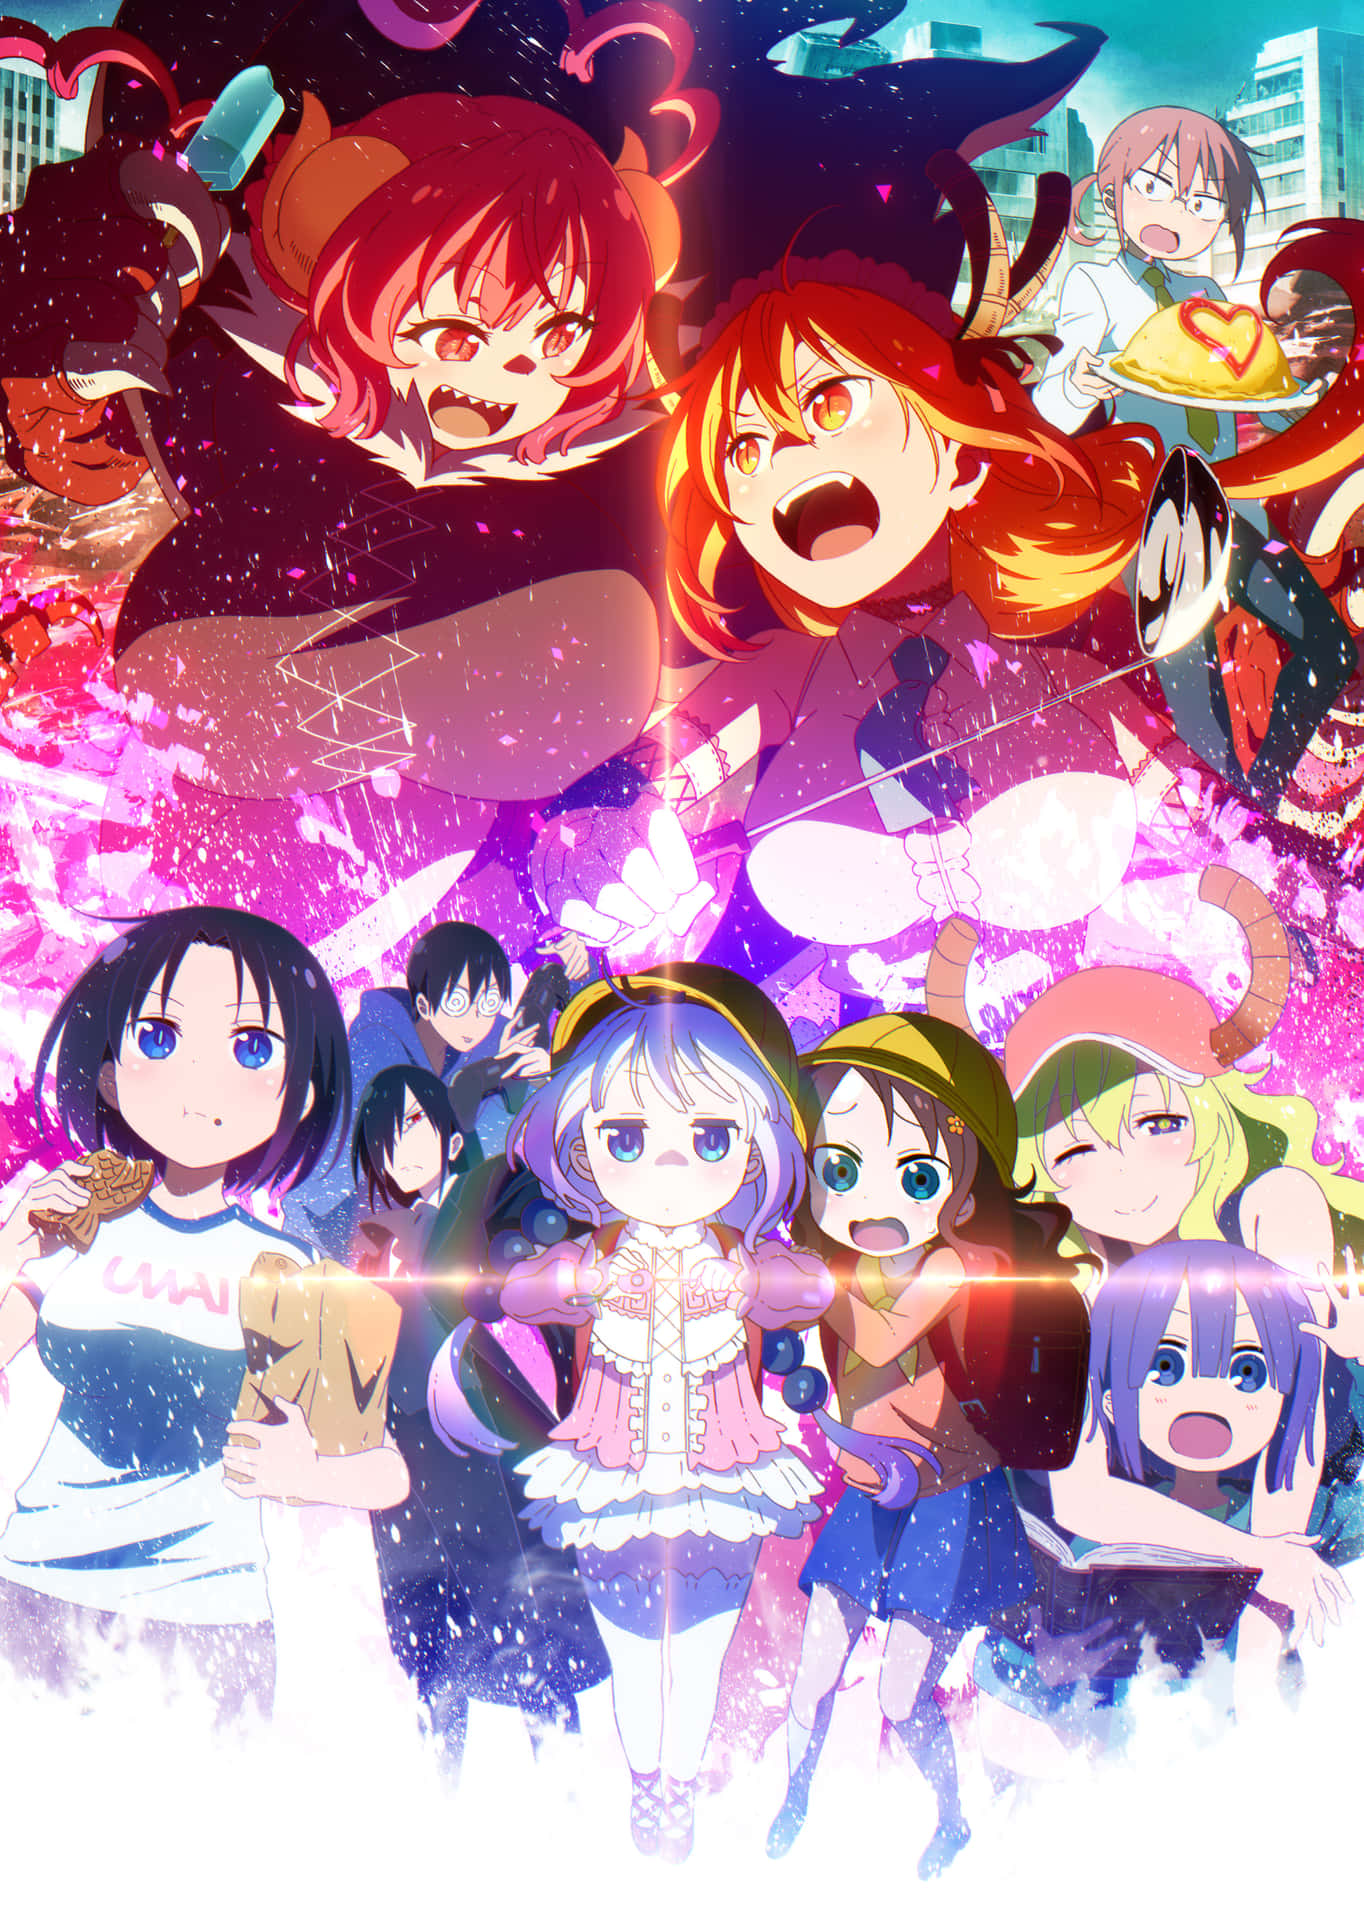 A Poster With Anime Characters And A Group Of People Wallpaper